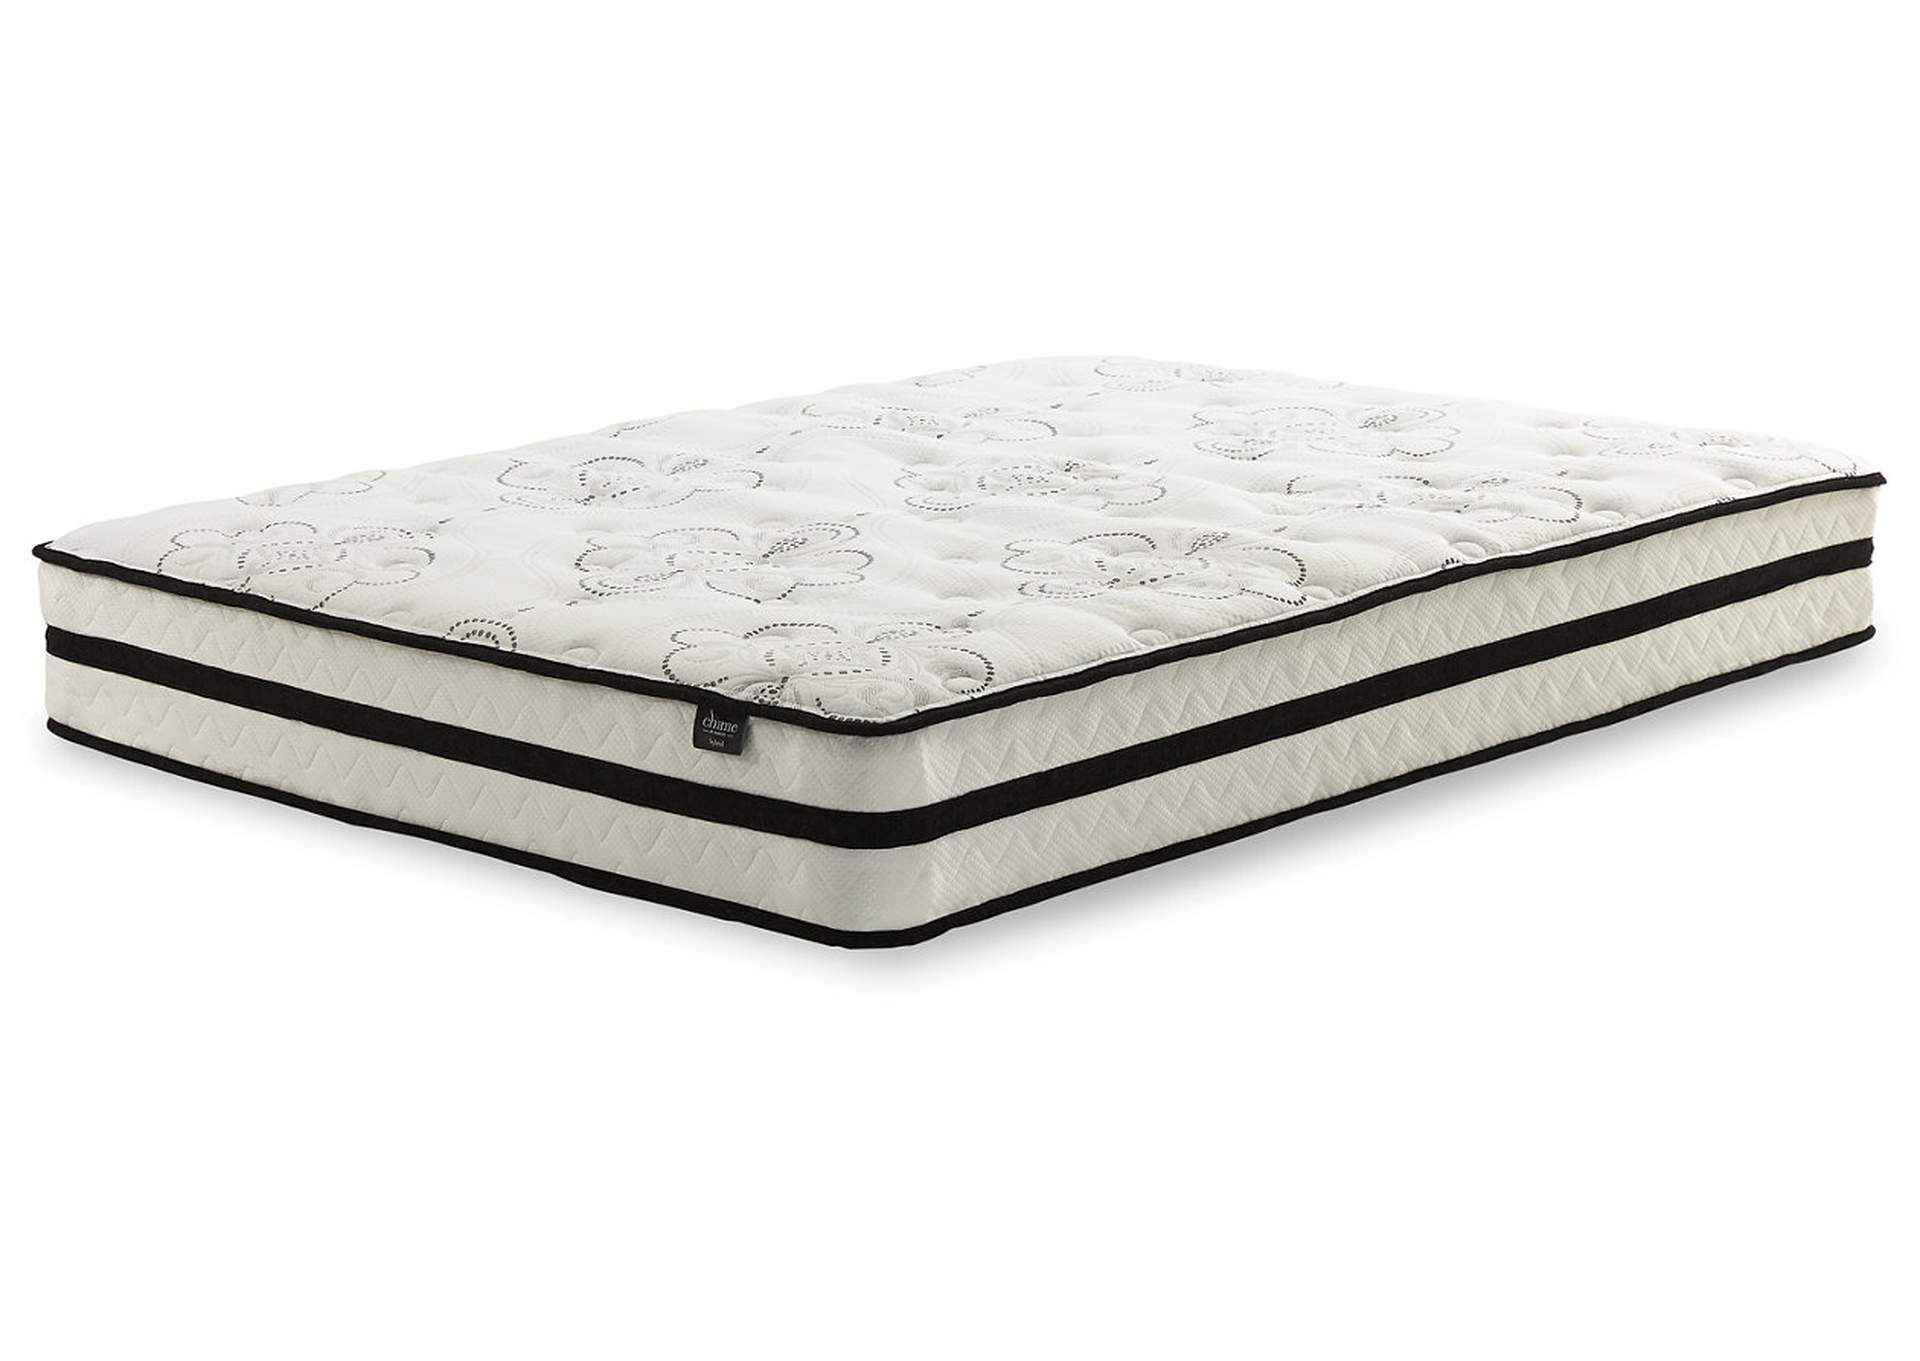 Chime 10 Inch Hybrid Twin Mattress in a Box Overstock Furniture 